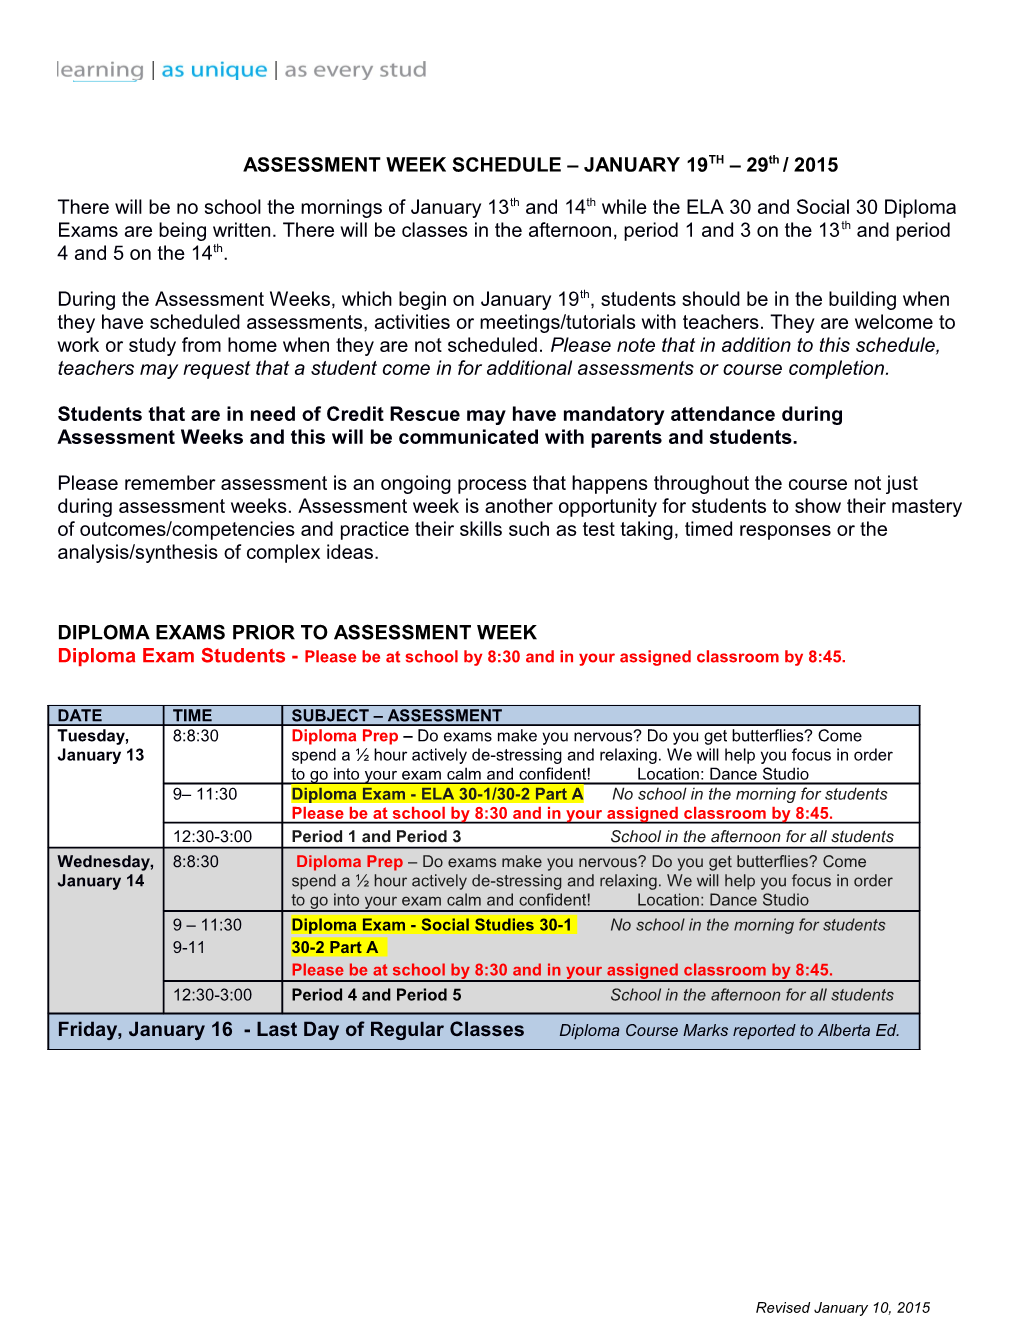 ASSESSMENT WEEK SCHEDULE JANUARY 19TH 29Th/ 2015